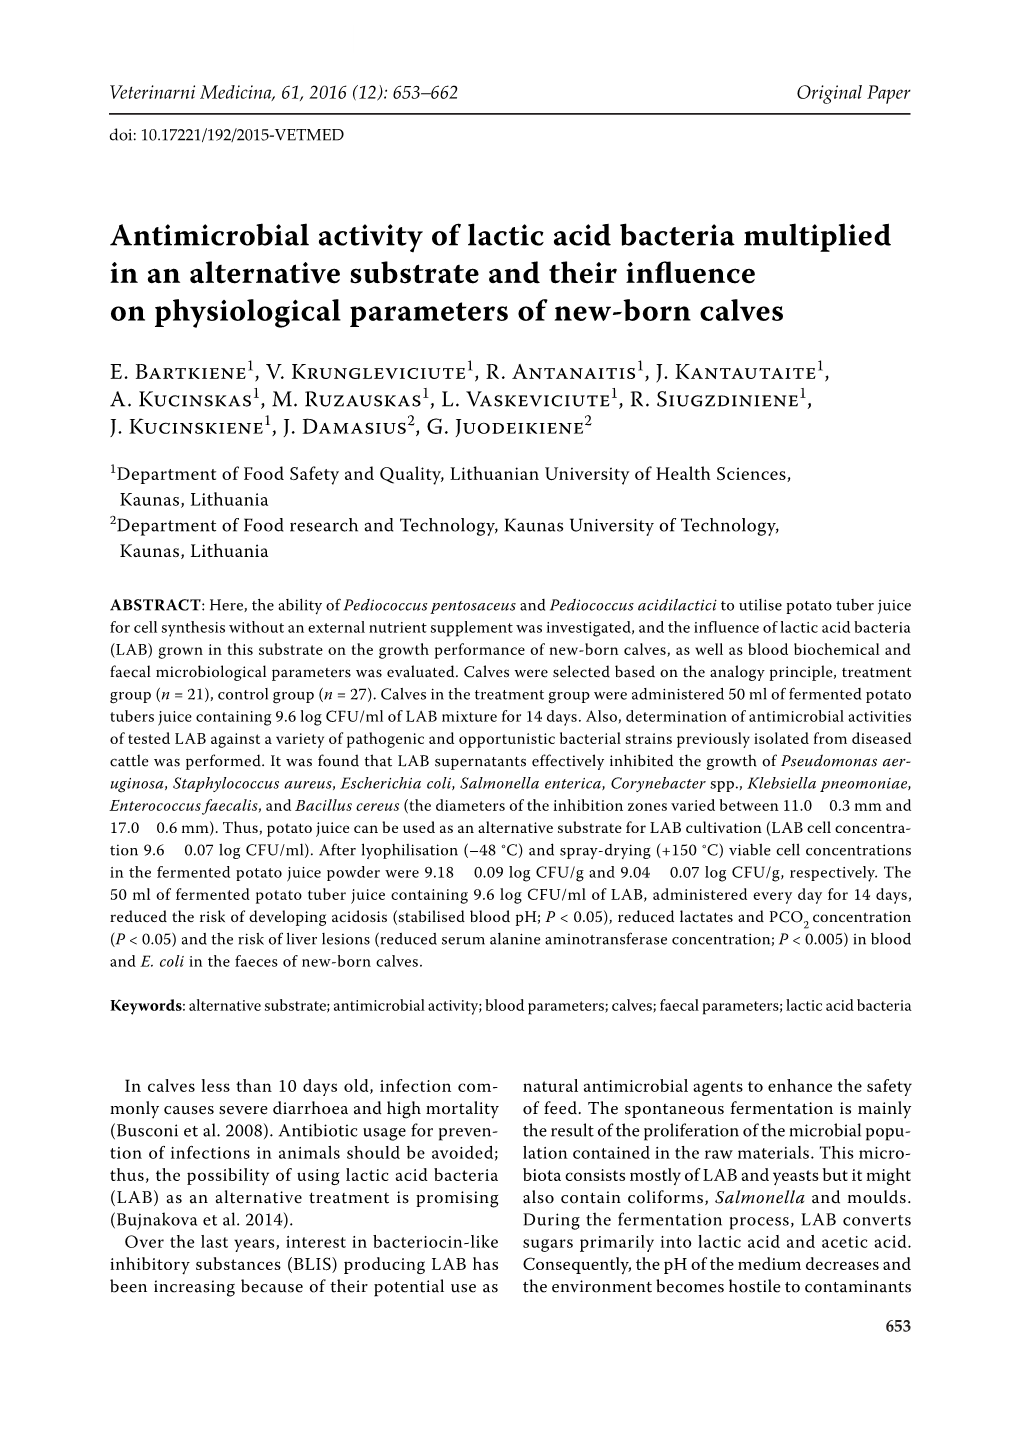 Antimicrobial Activity of Lactic Acid Bacteria Multiplied in an Alternative Substrate and Their Influence on Physiological Parameters of New-Born Calves